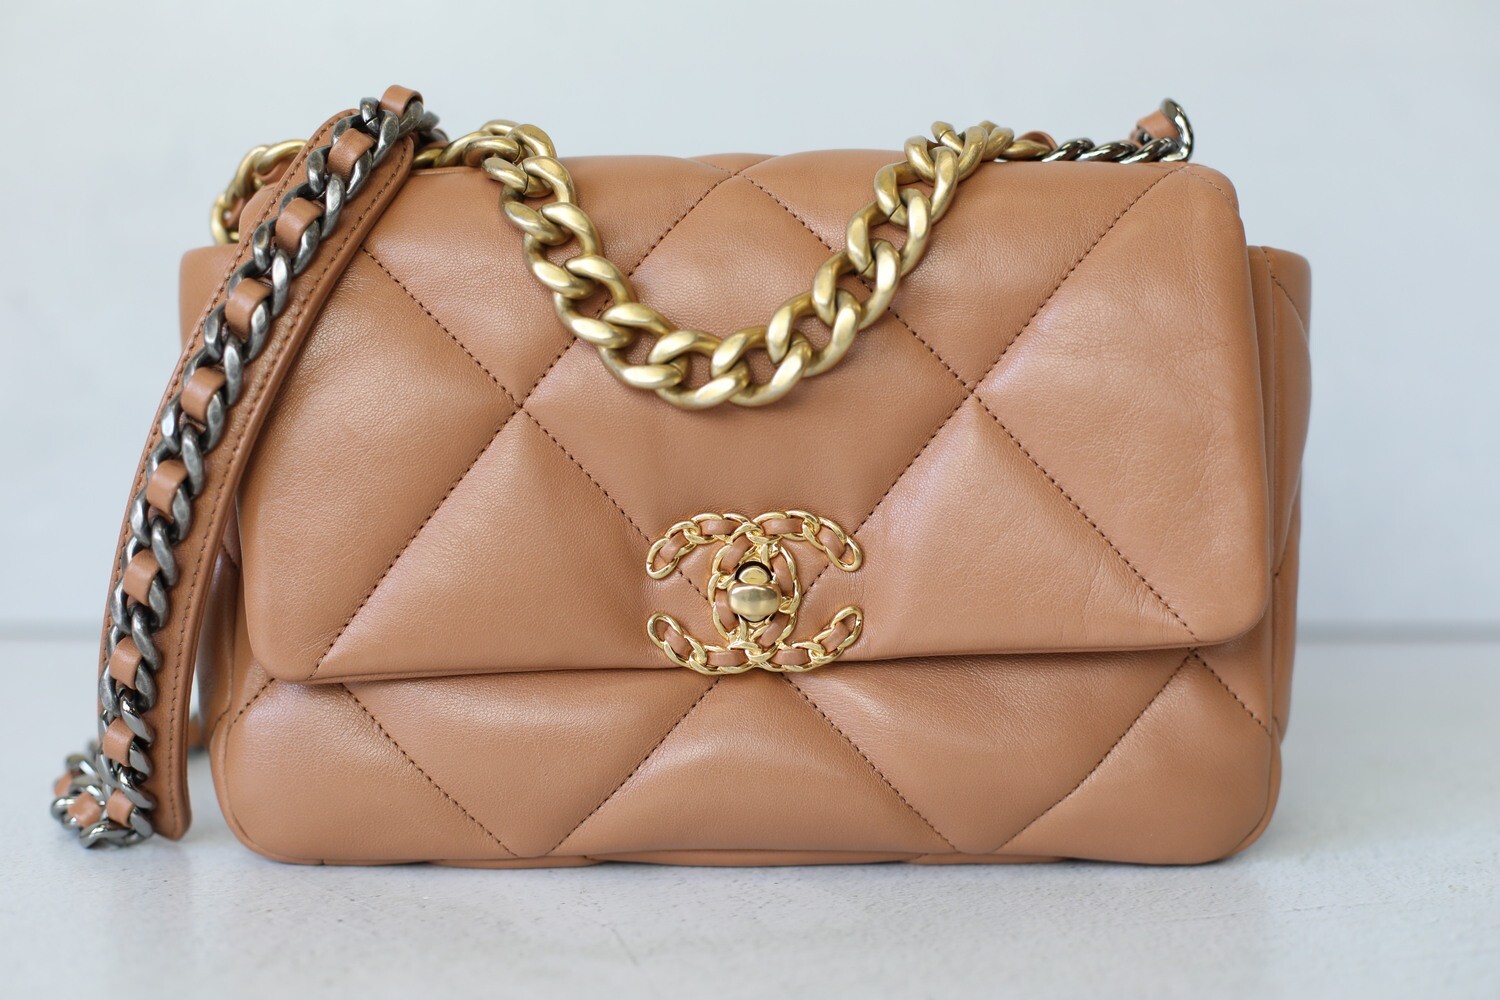 Chanel 19 Small, Caramel Brown, Preowned In Box, WA001